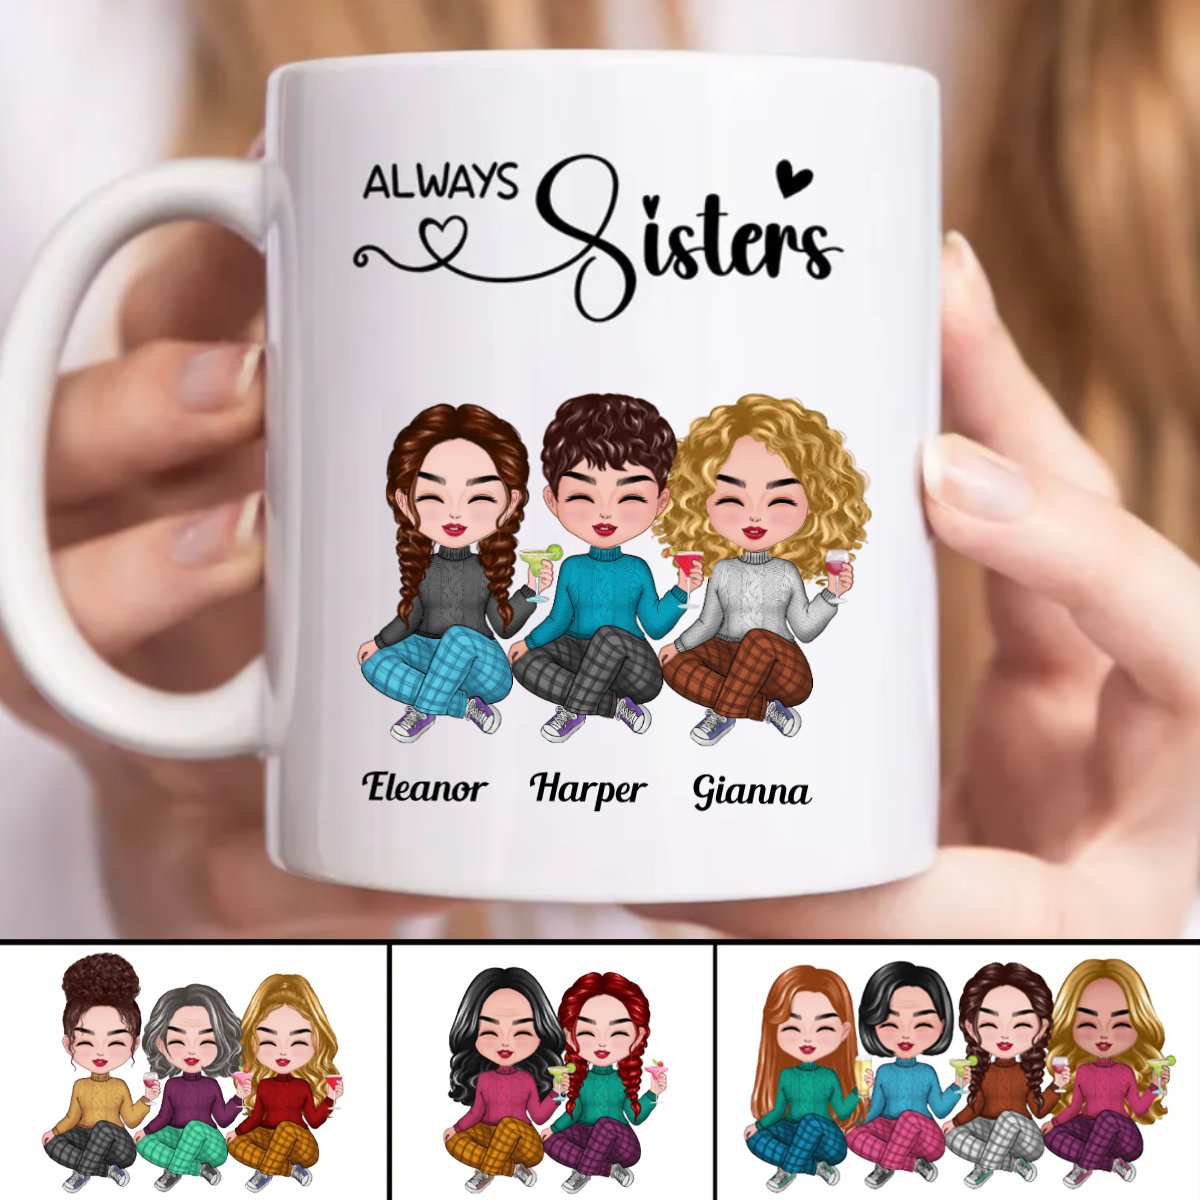 Discover Always Sisters - Personalized Mug